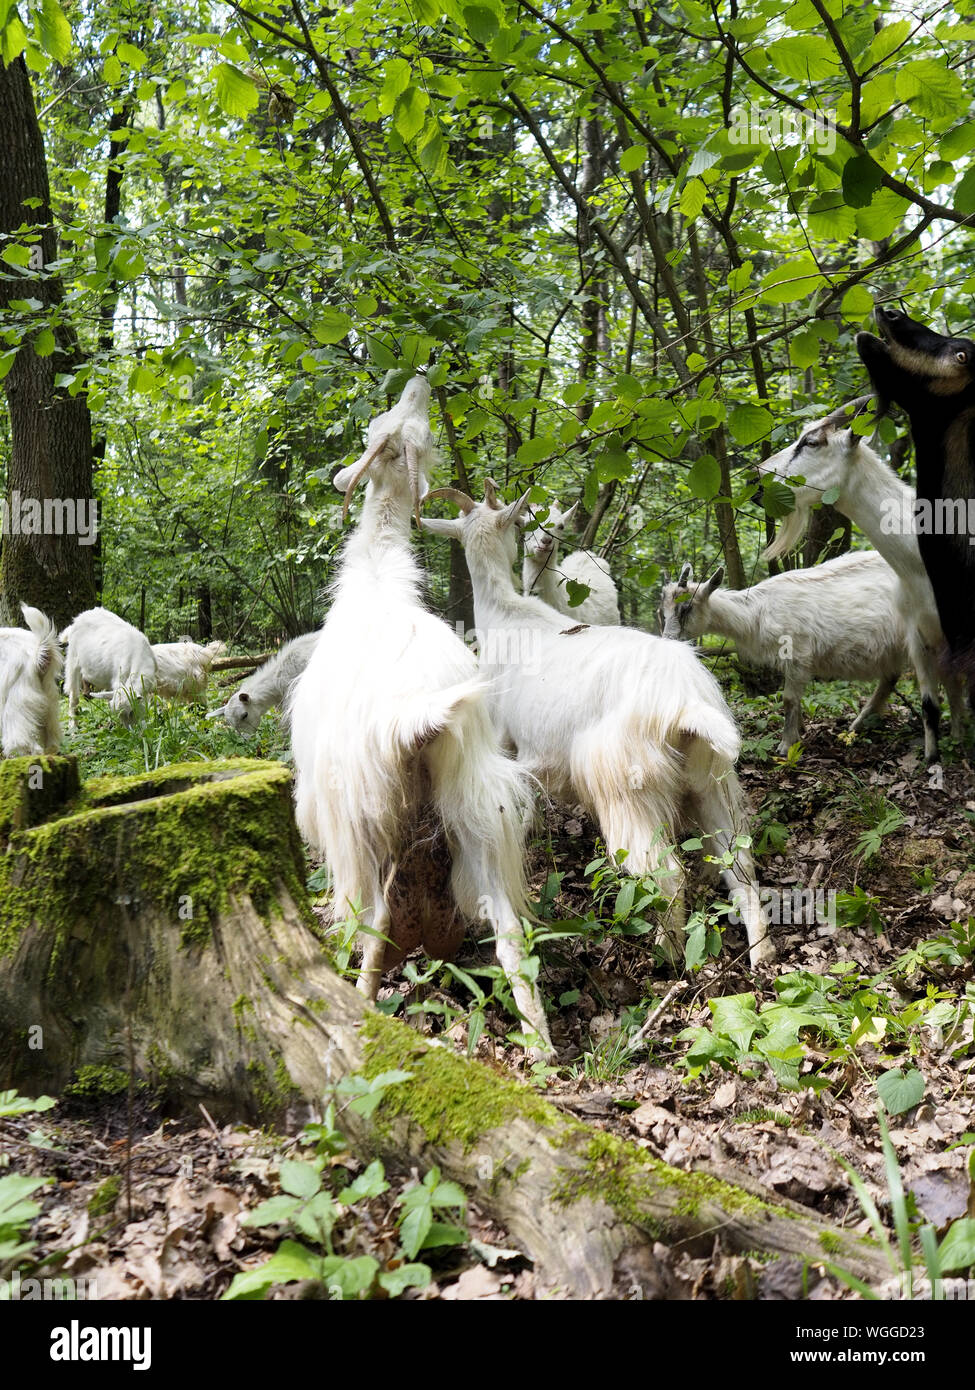 Goats Eating Plants In Forest Stock Photo